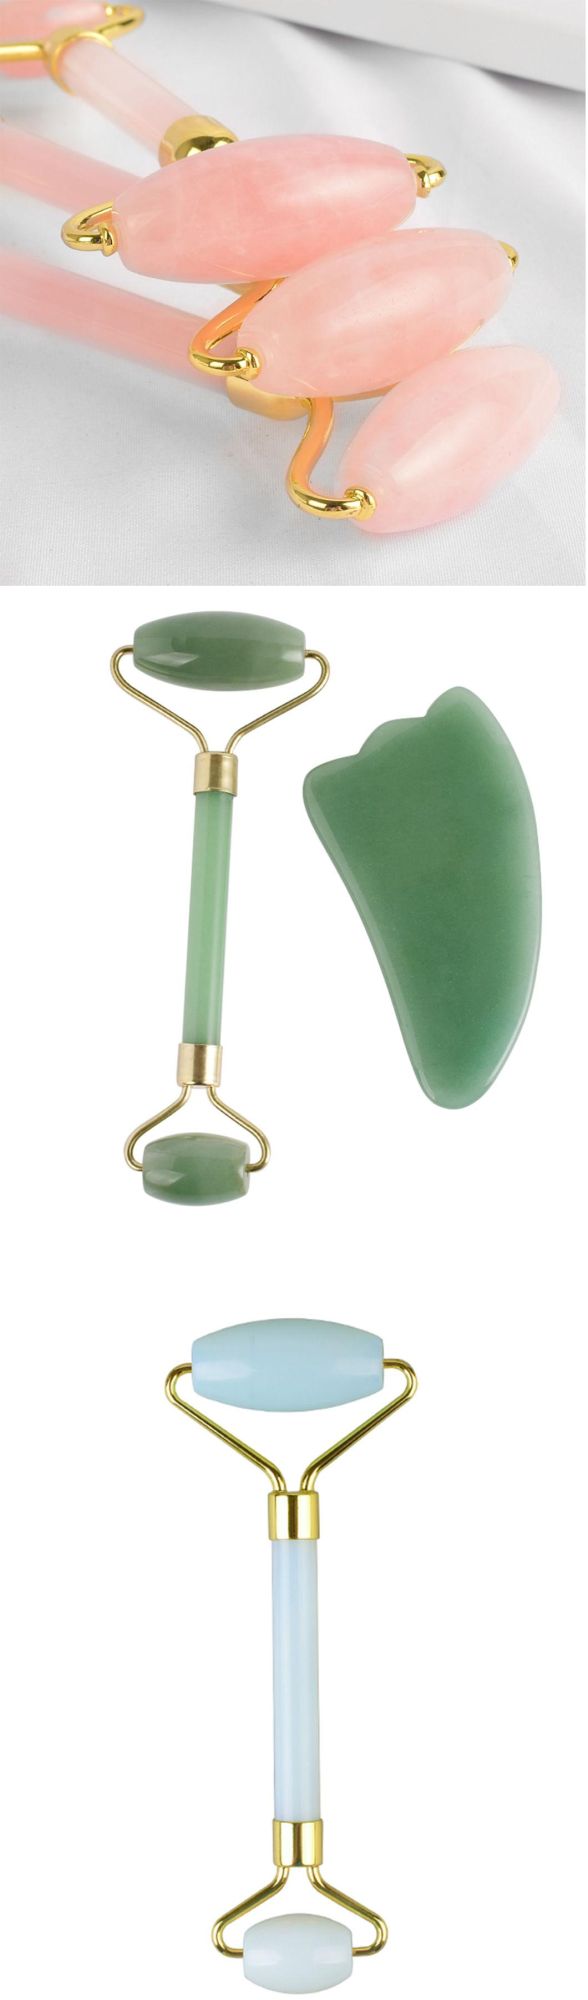 Hot Selling Face Massager Tool Rose Quartz Double Head Spiked Jade Roller Product